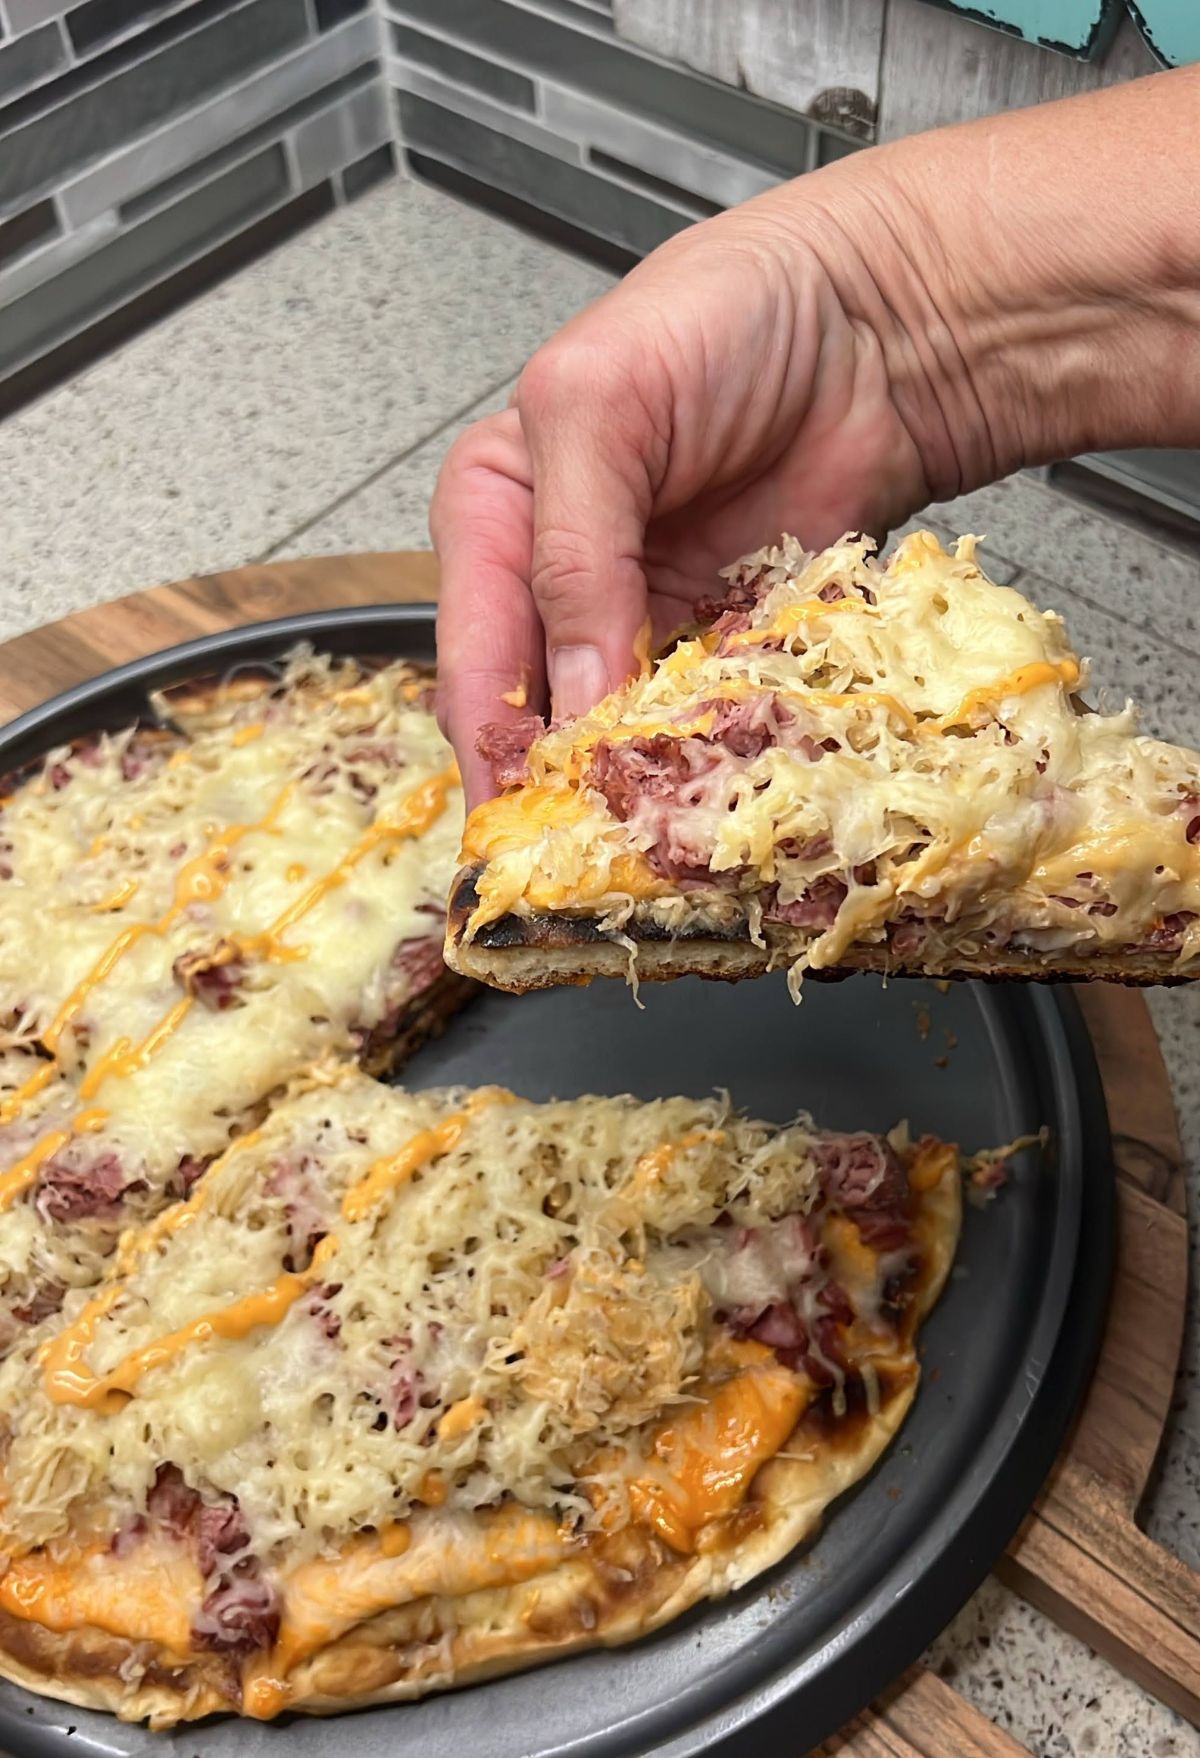 A person using a Blackstone Pizza Oven removing a slice of rueben pizza from a pan.